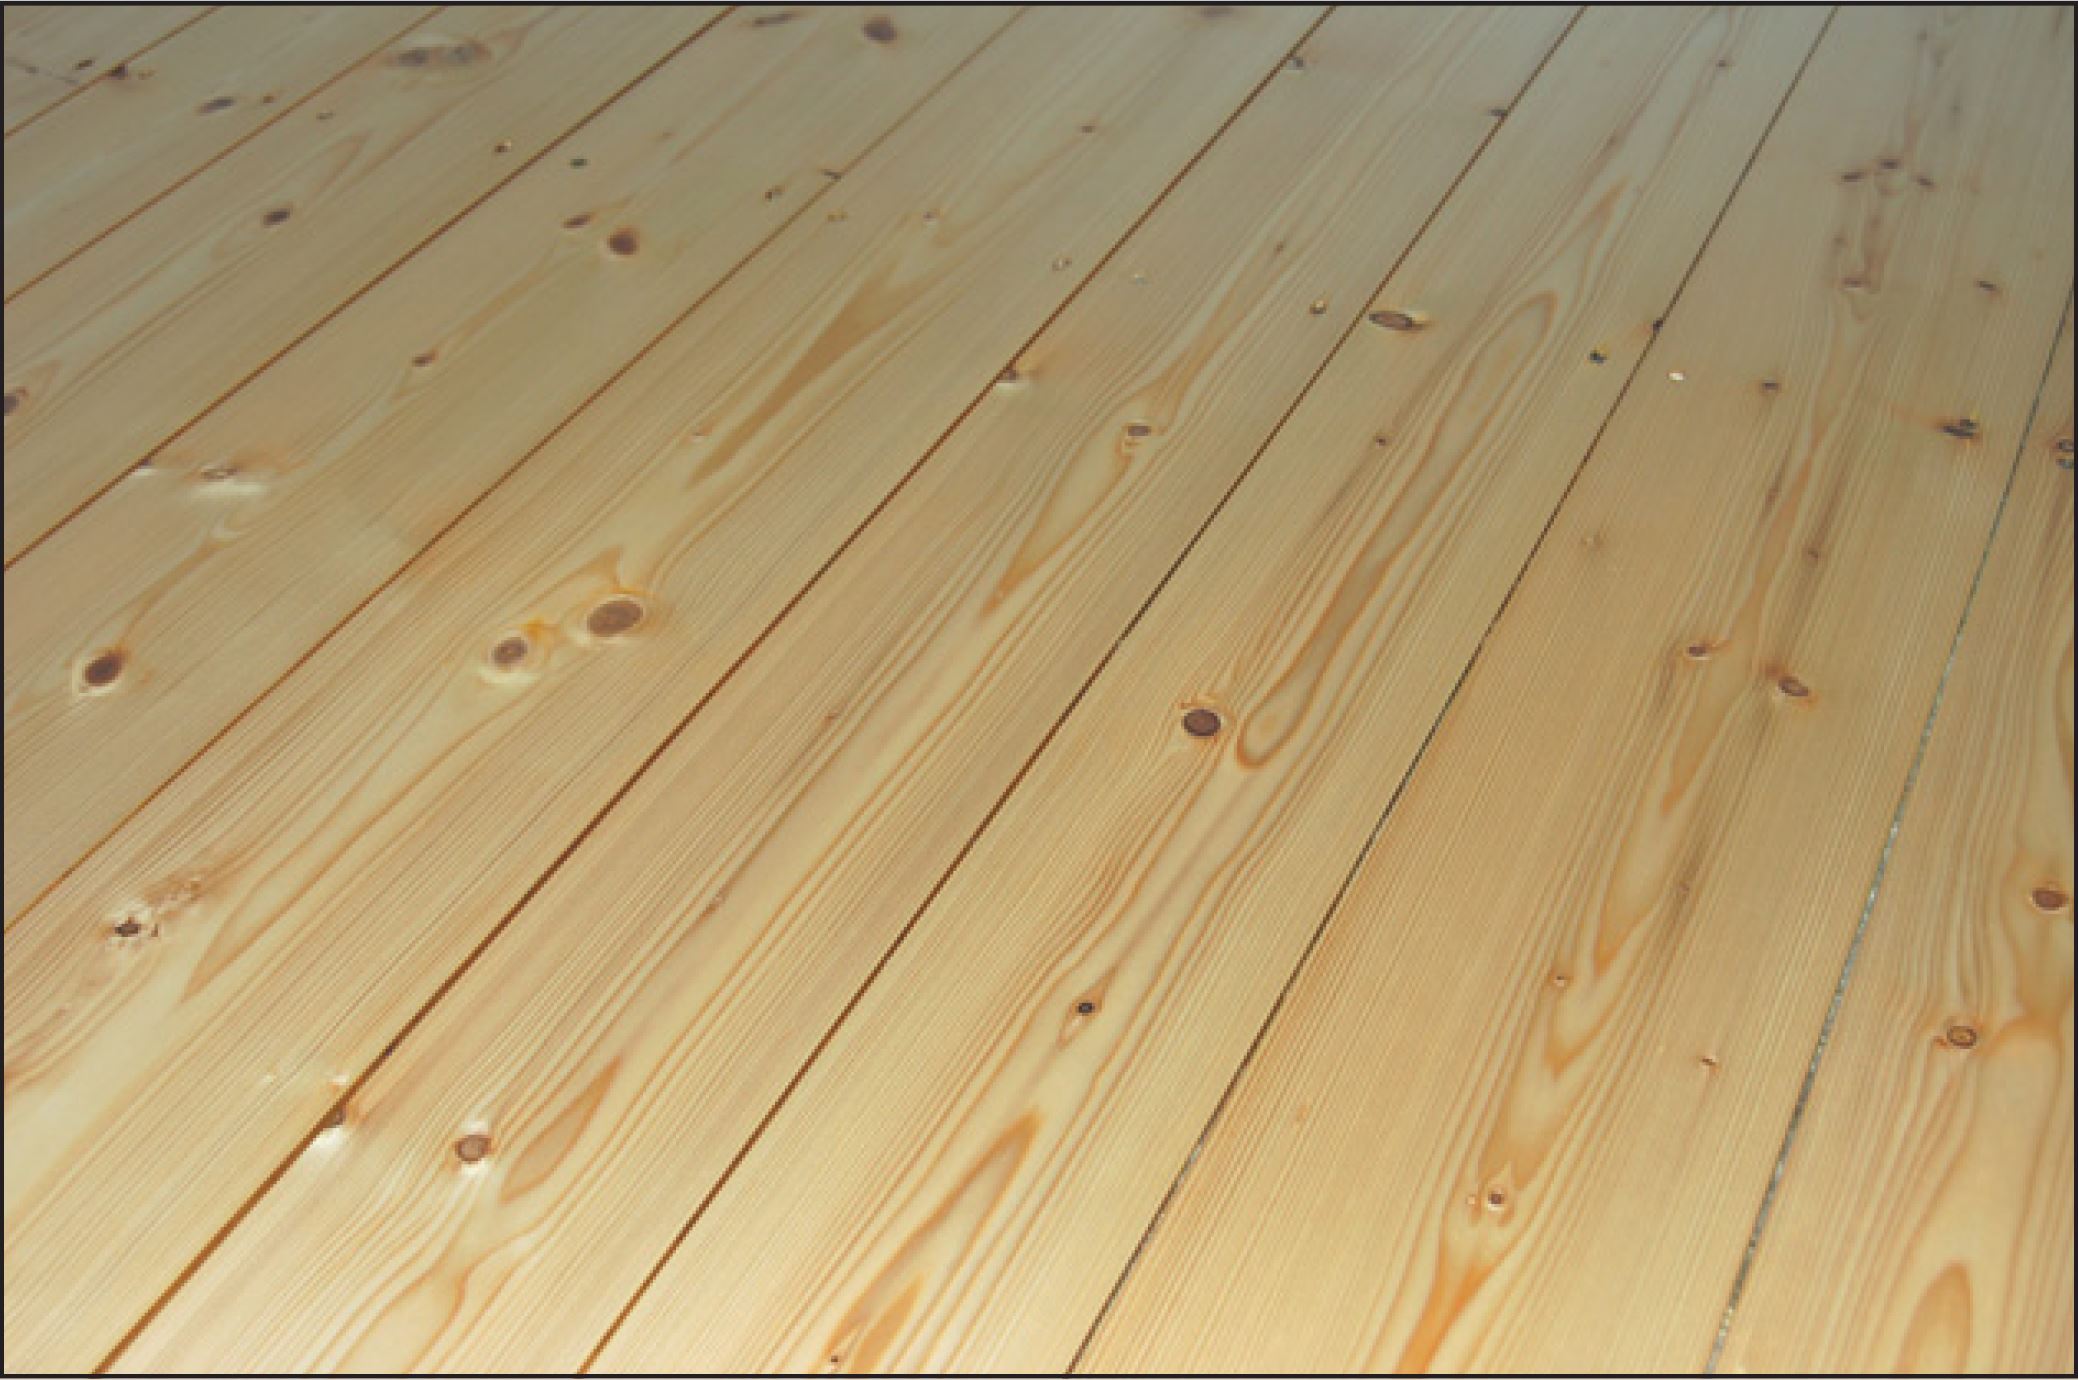 Knotty Wood Flooring Is Extra-Tough to Sand